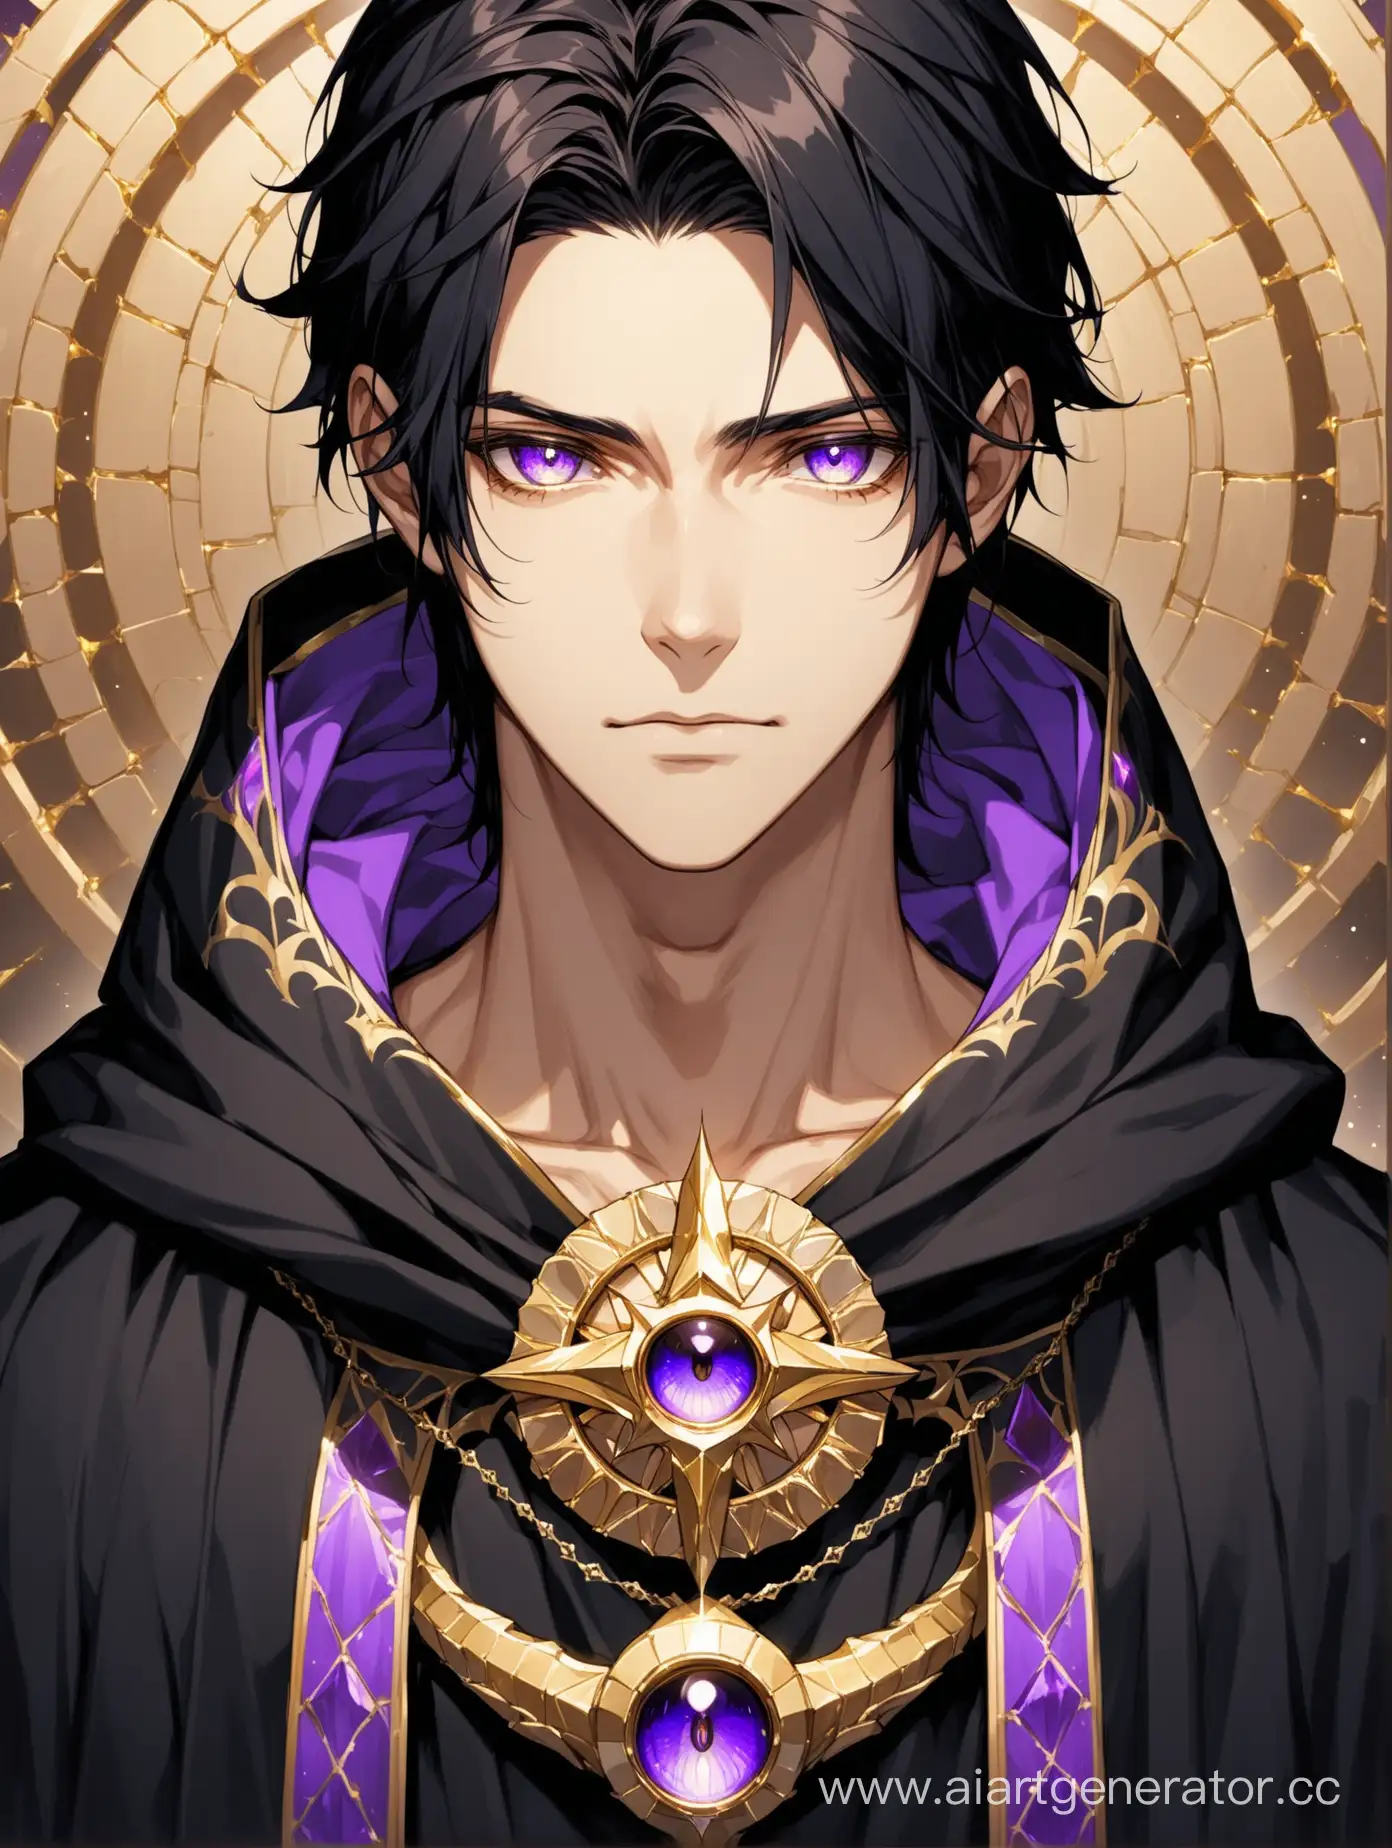 Young man, black hair, eyes of different colors: the iris of the left eye is golden, and the iris of the right eye is purple, no facial hair, light skin, fragile build, no emotions on the face, wearing a black robe with a purple lining and gold ornament